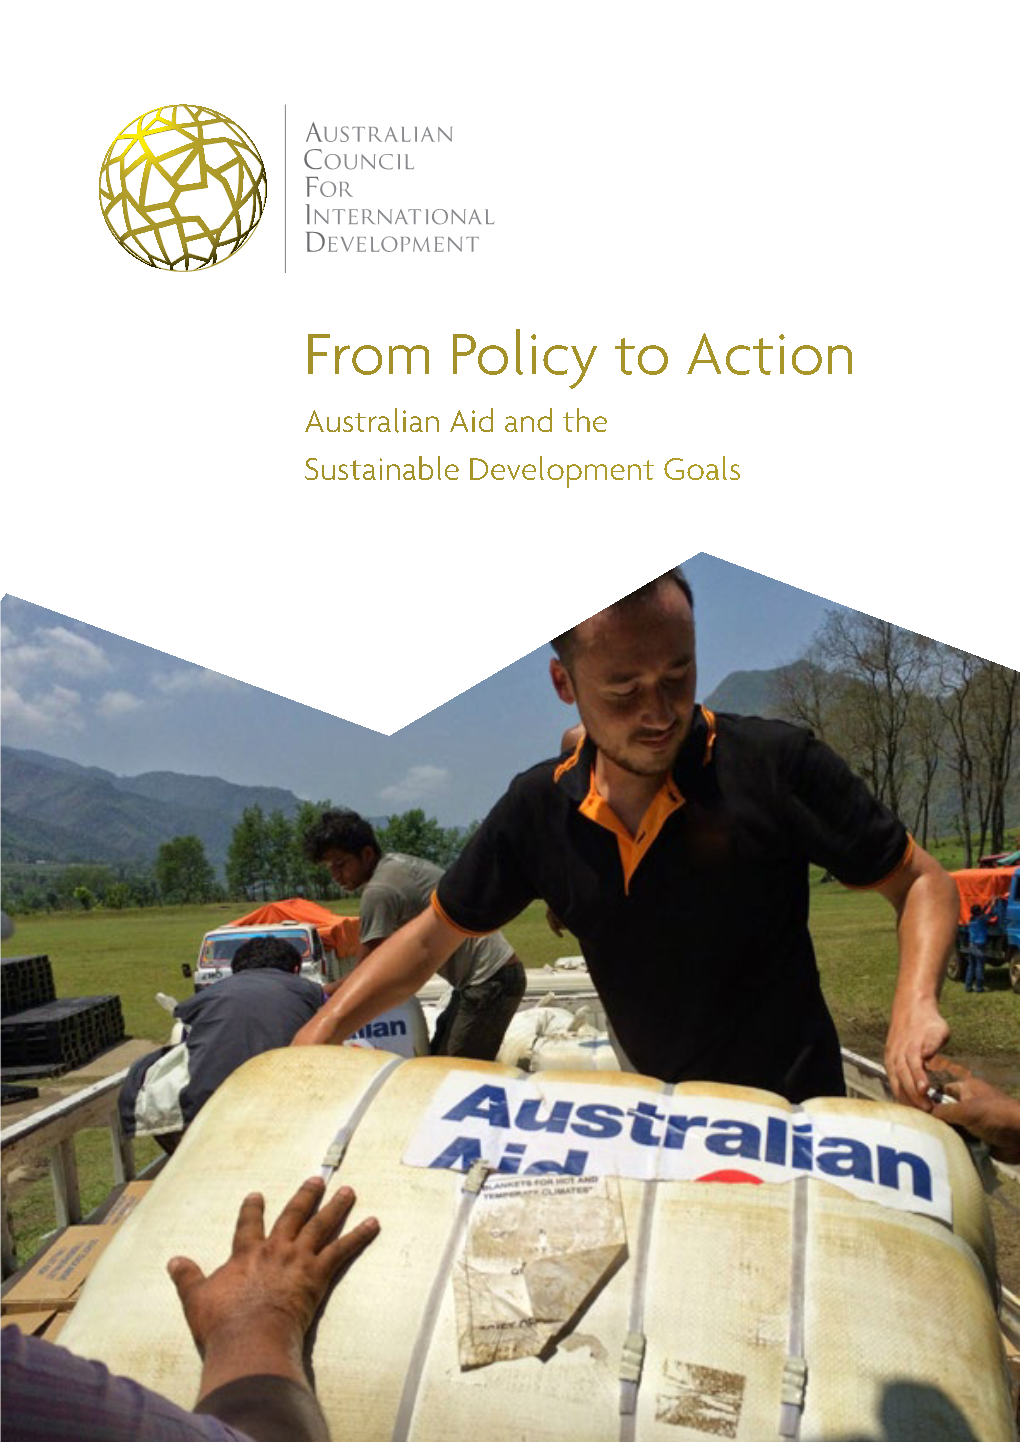 From Policy to Action—Australian Aid and the Sustainable Development